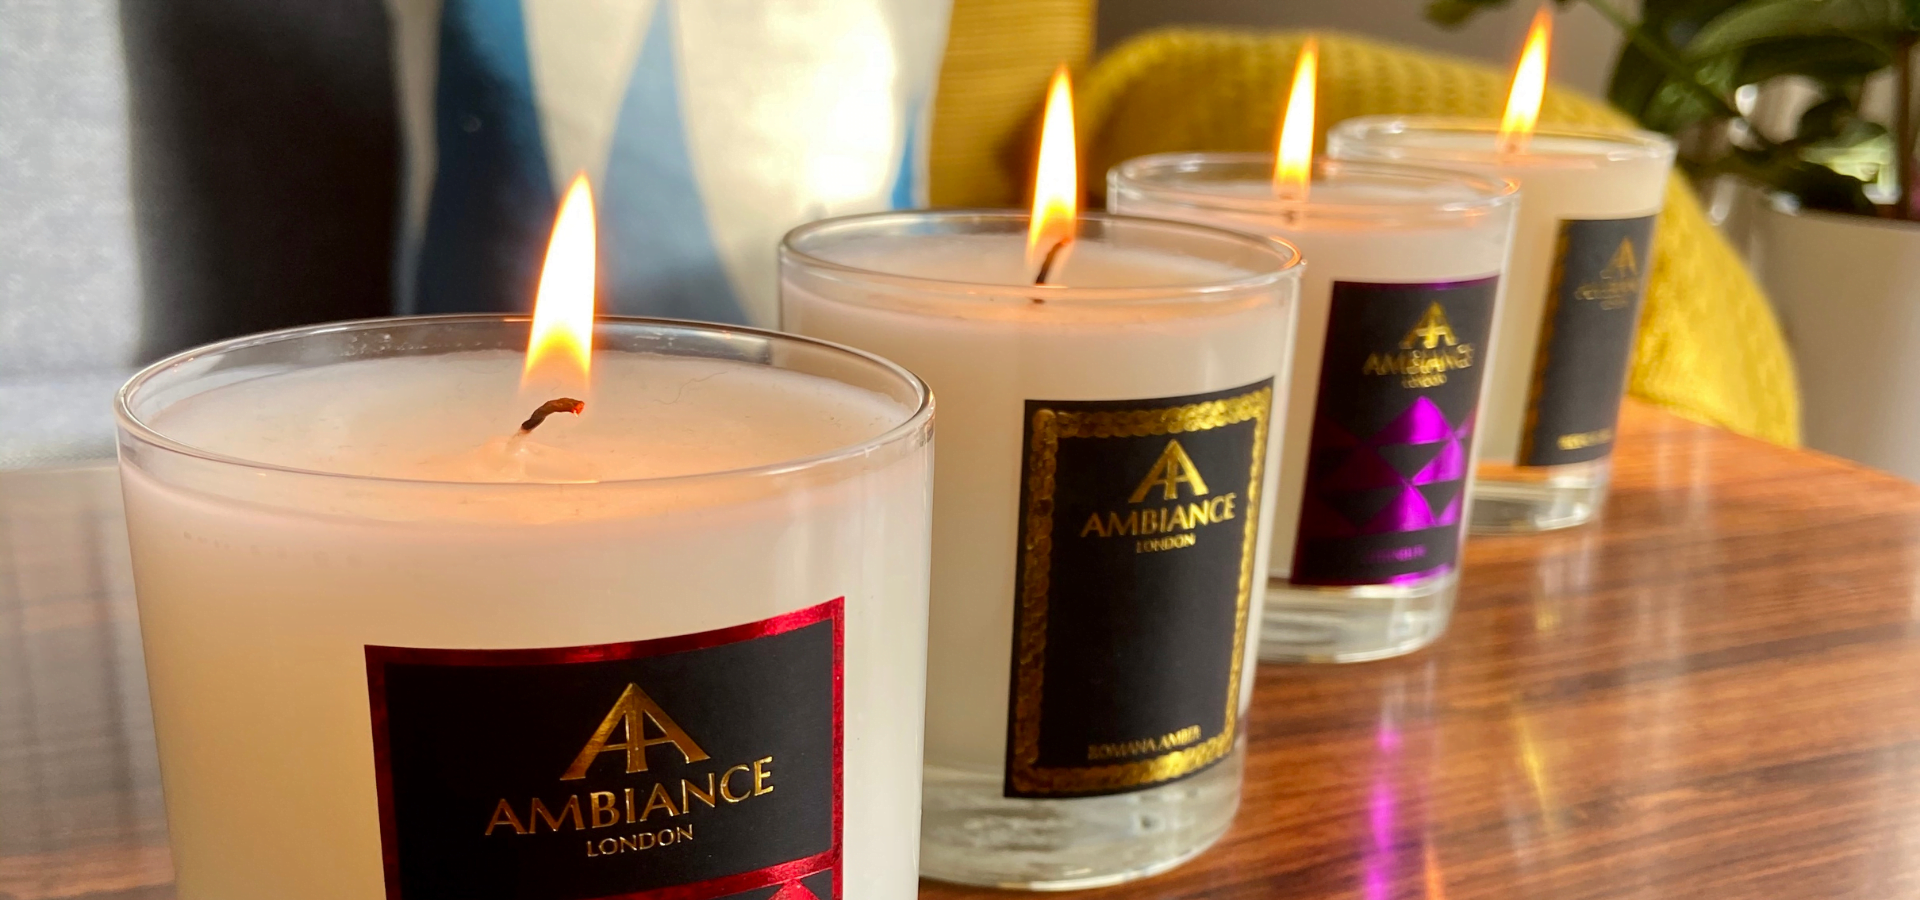 the best candles the scent your space - luxury scented candles - hand poured ancienne ambiance candles